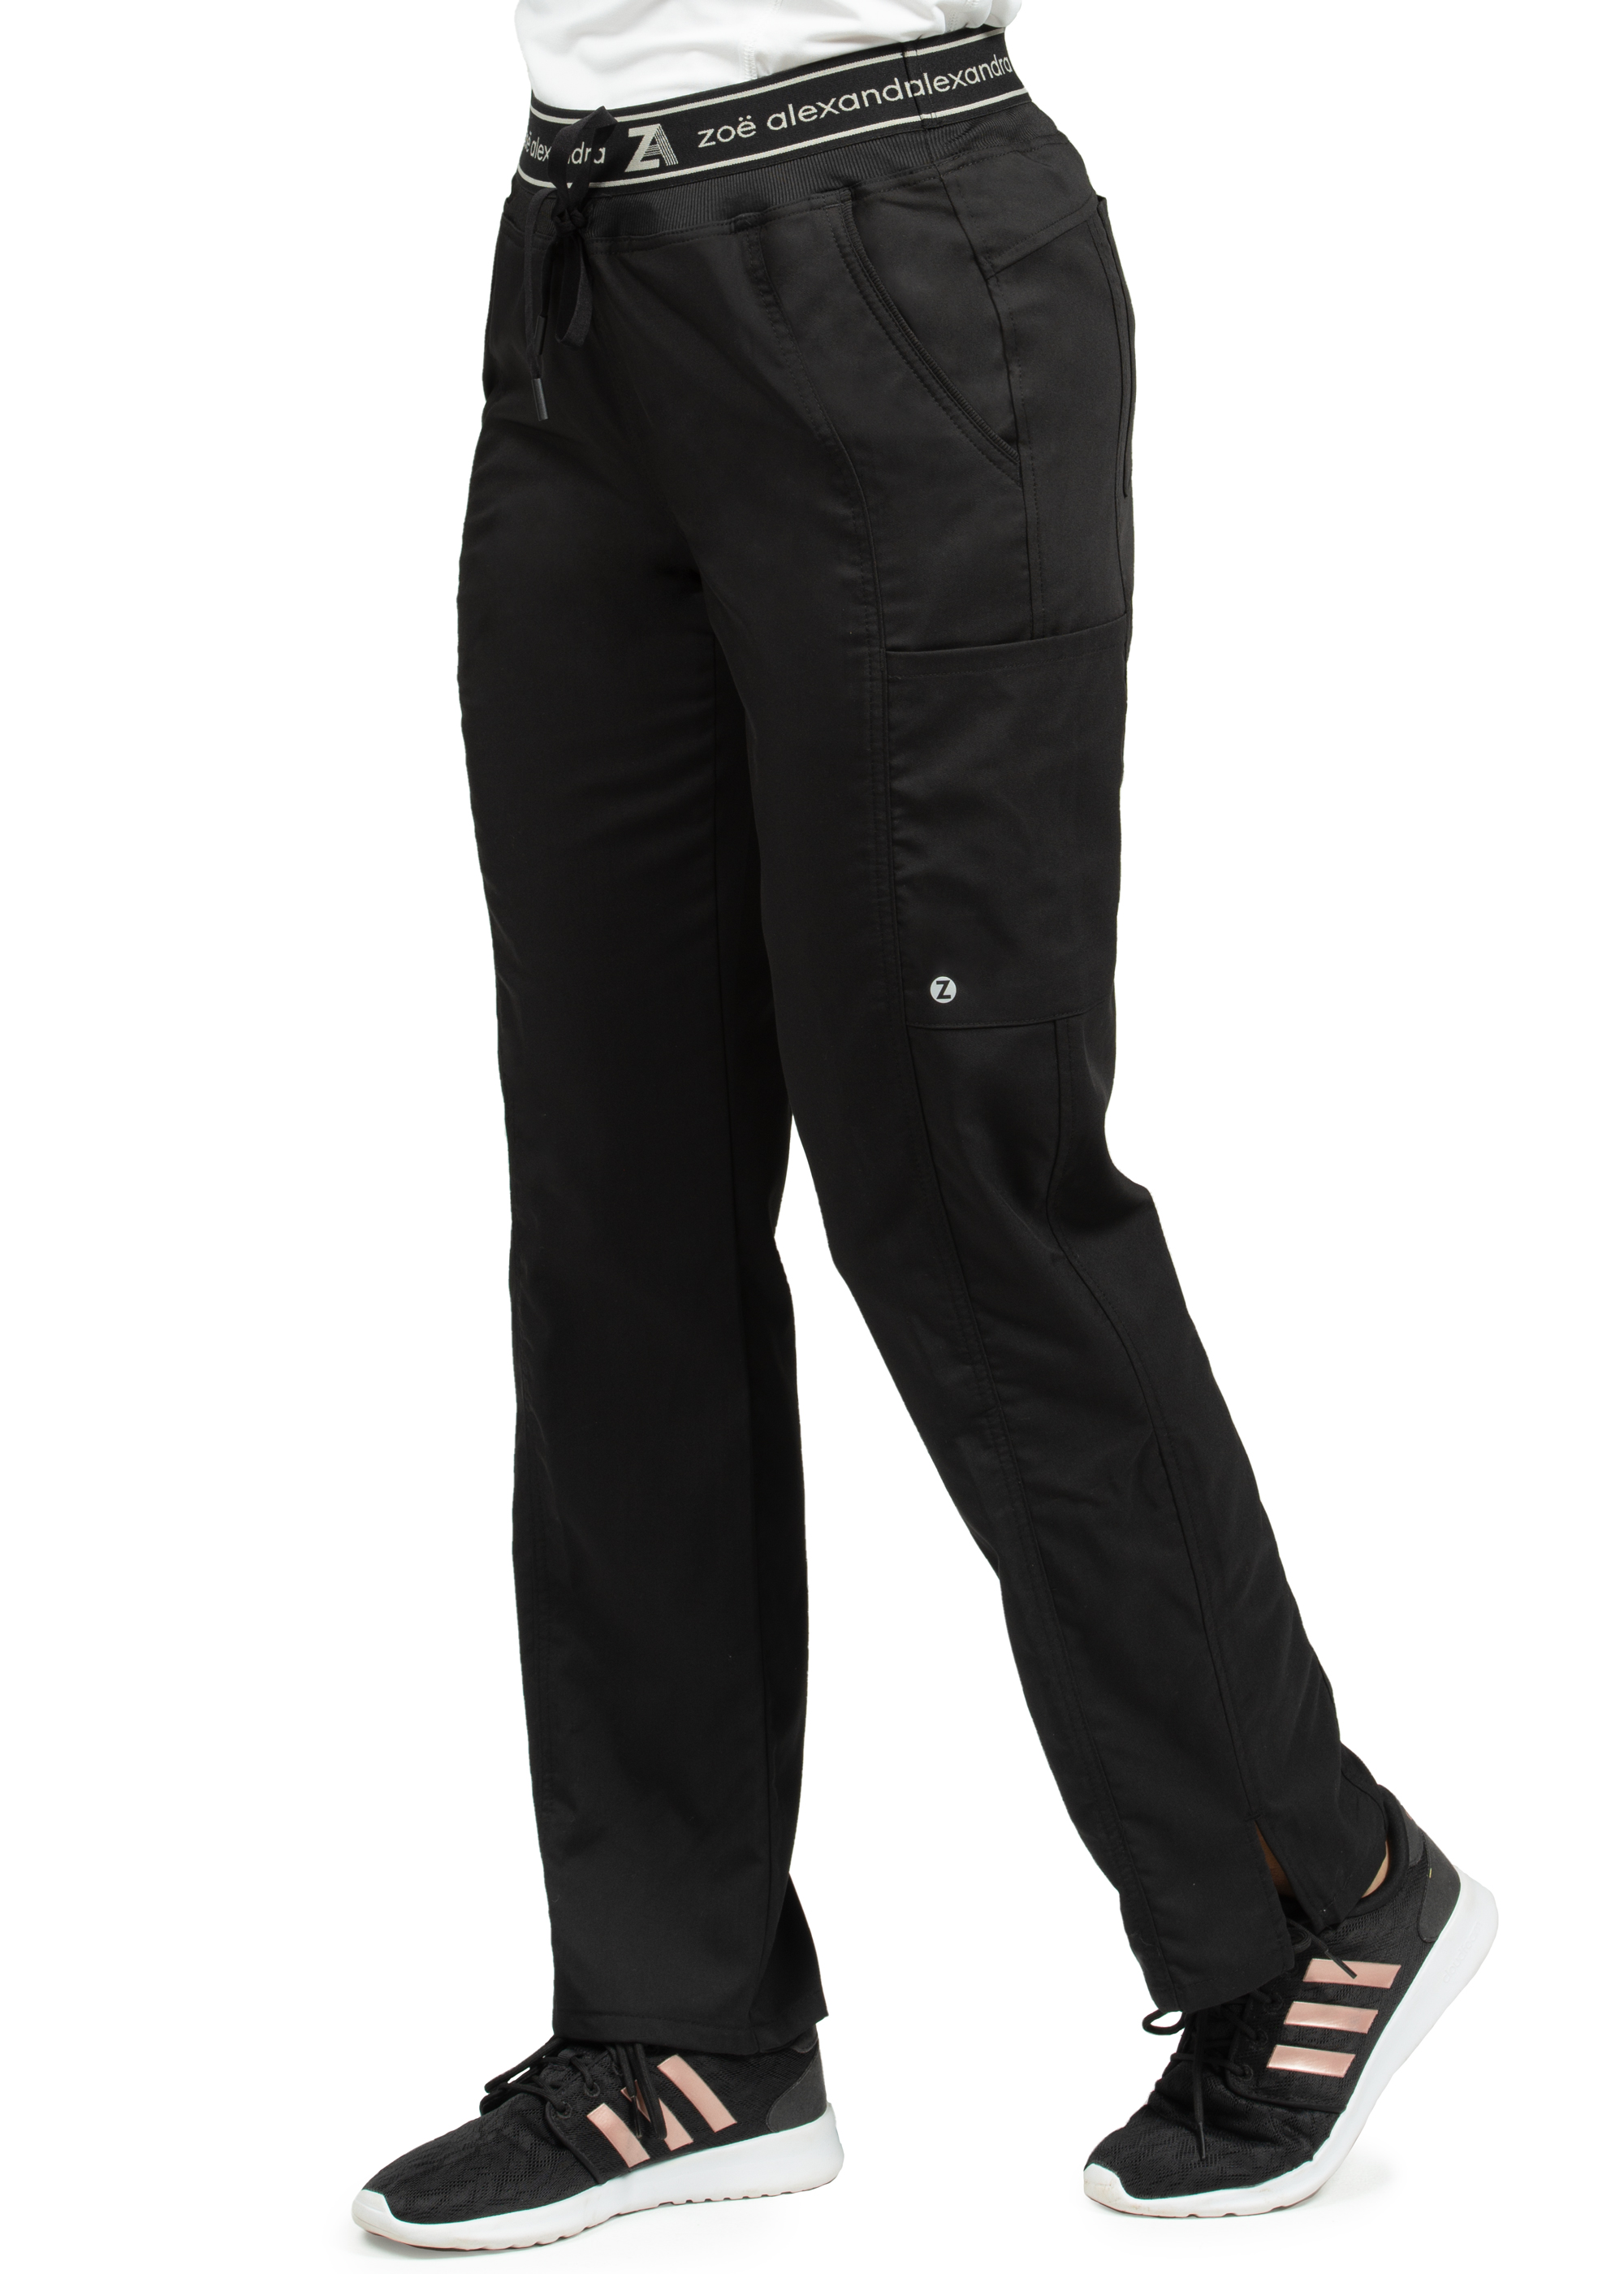 Tony Moro Men's trousers with pockets and cuffs: for sale at 19.99€ on